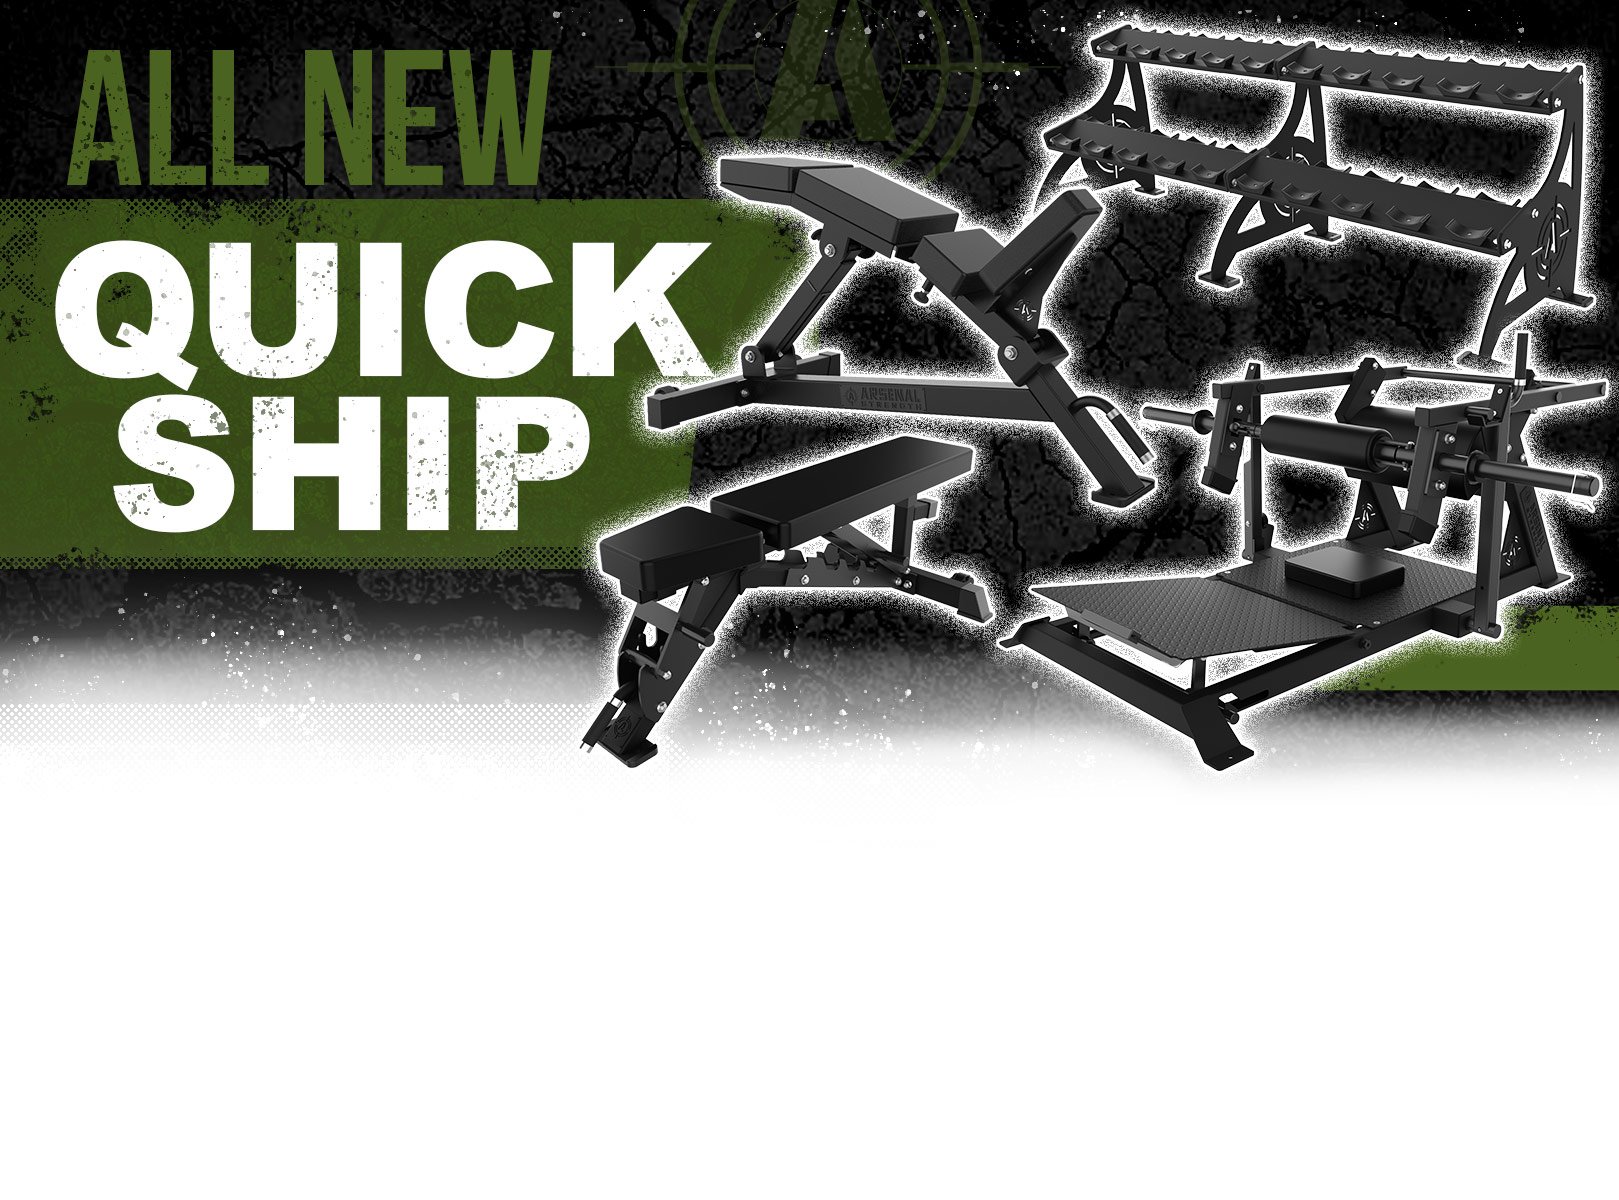 All New Quick Ship